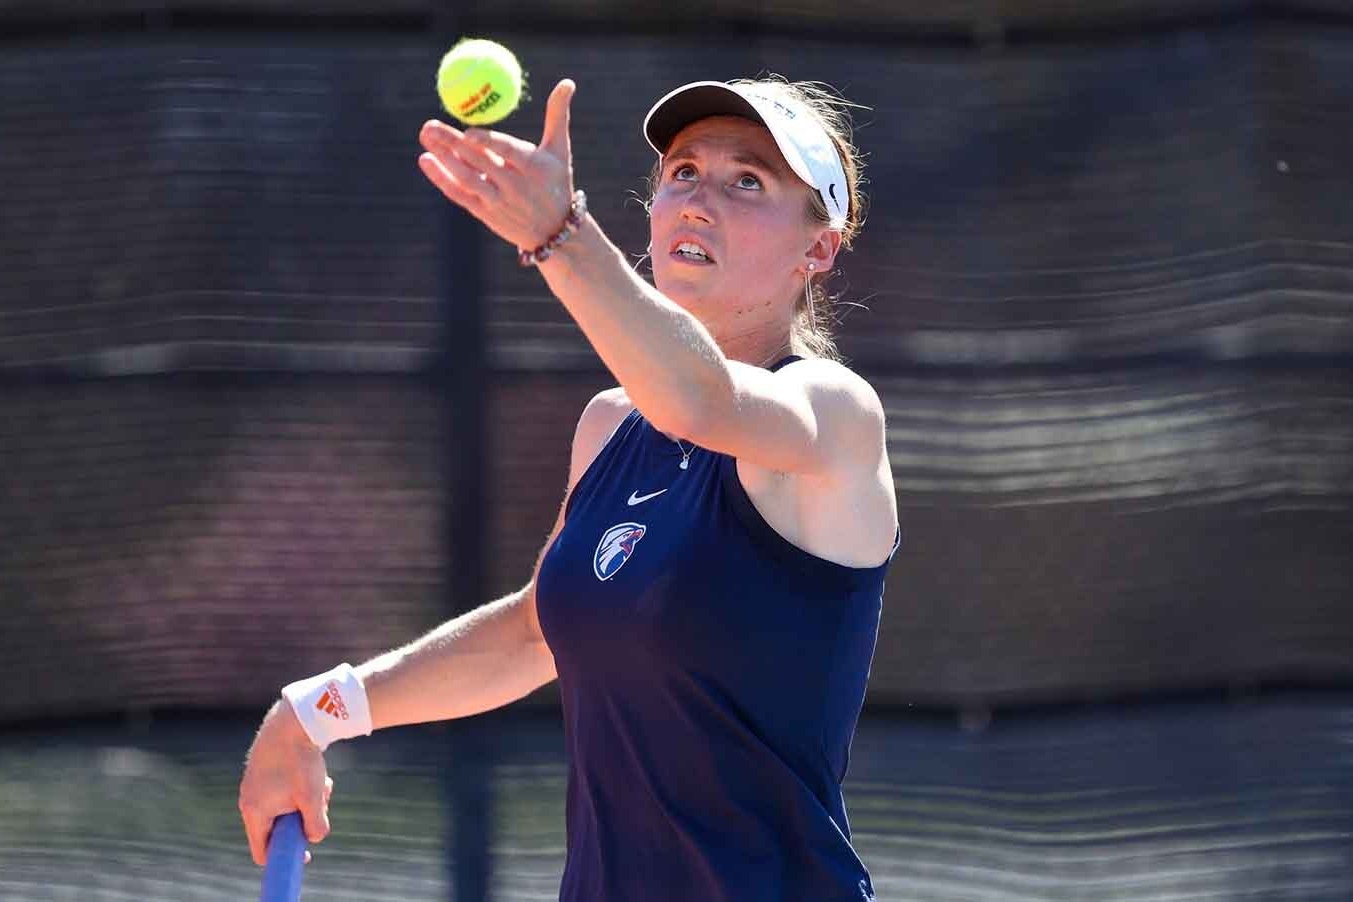 Brooklyn Ross of Colorado is a 27-year-old transgender woman who plays on the women's tennis team at the University of Texas at Tyler. Ross withdrew from this weekend's Wyoming Governor's Cup tournament in Cheyenne.